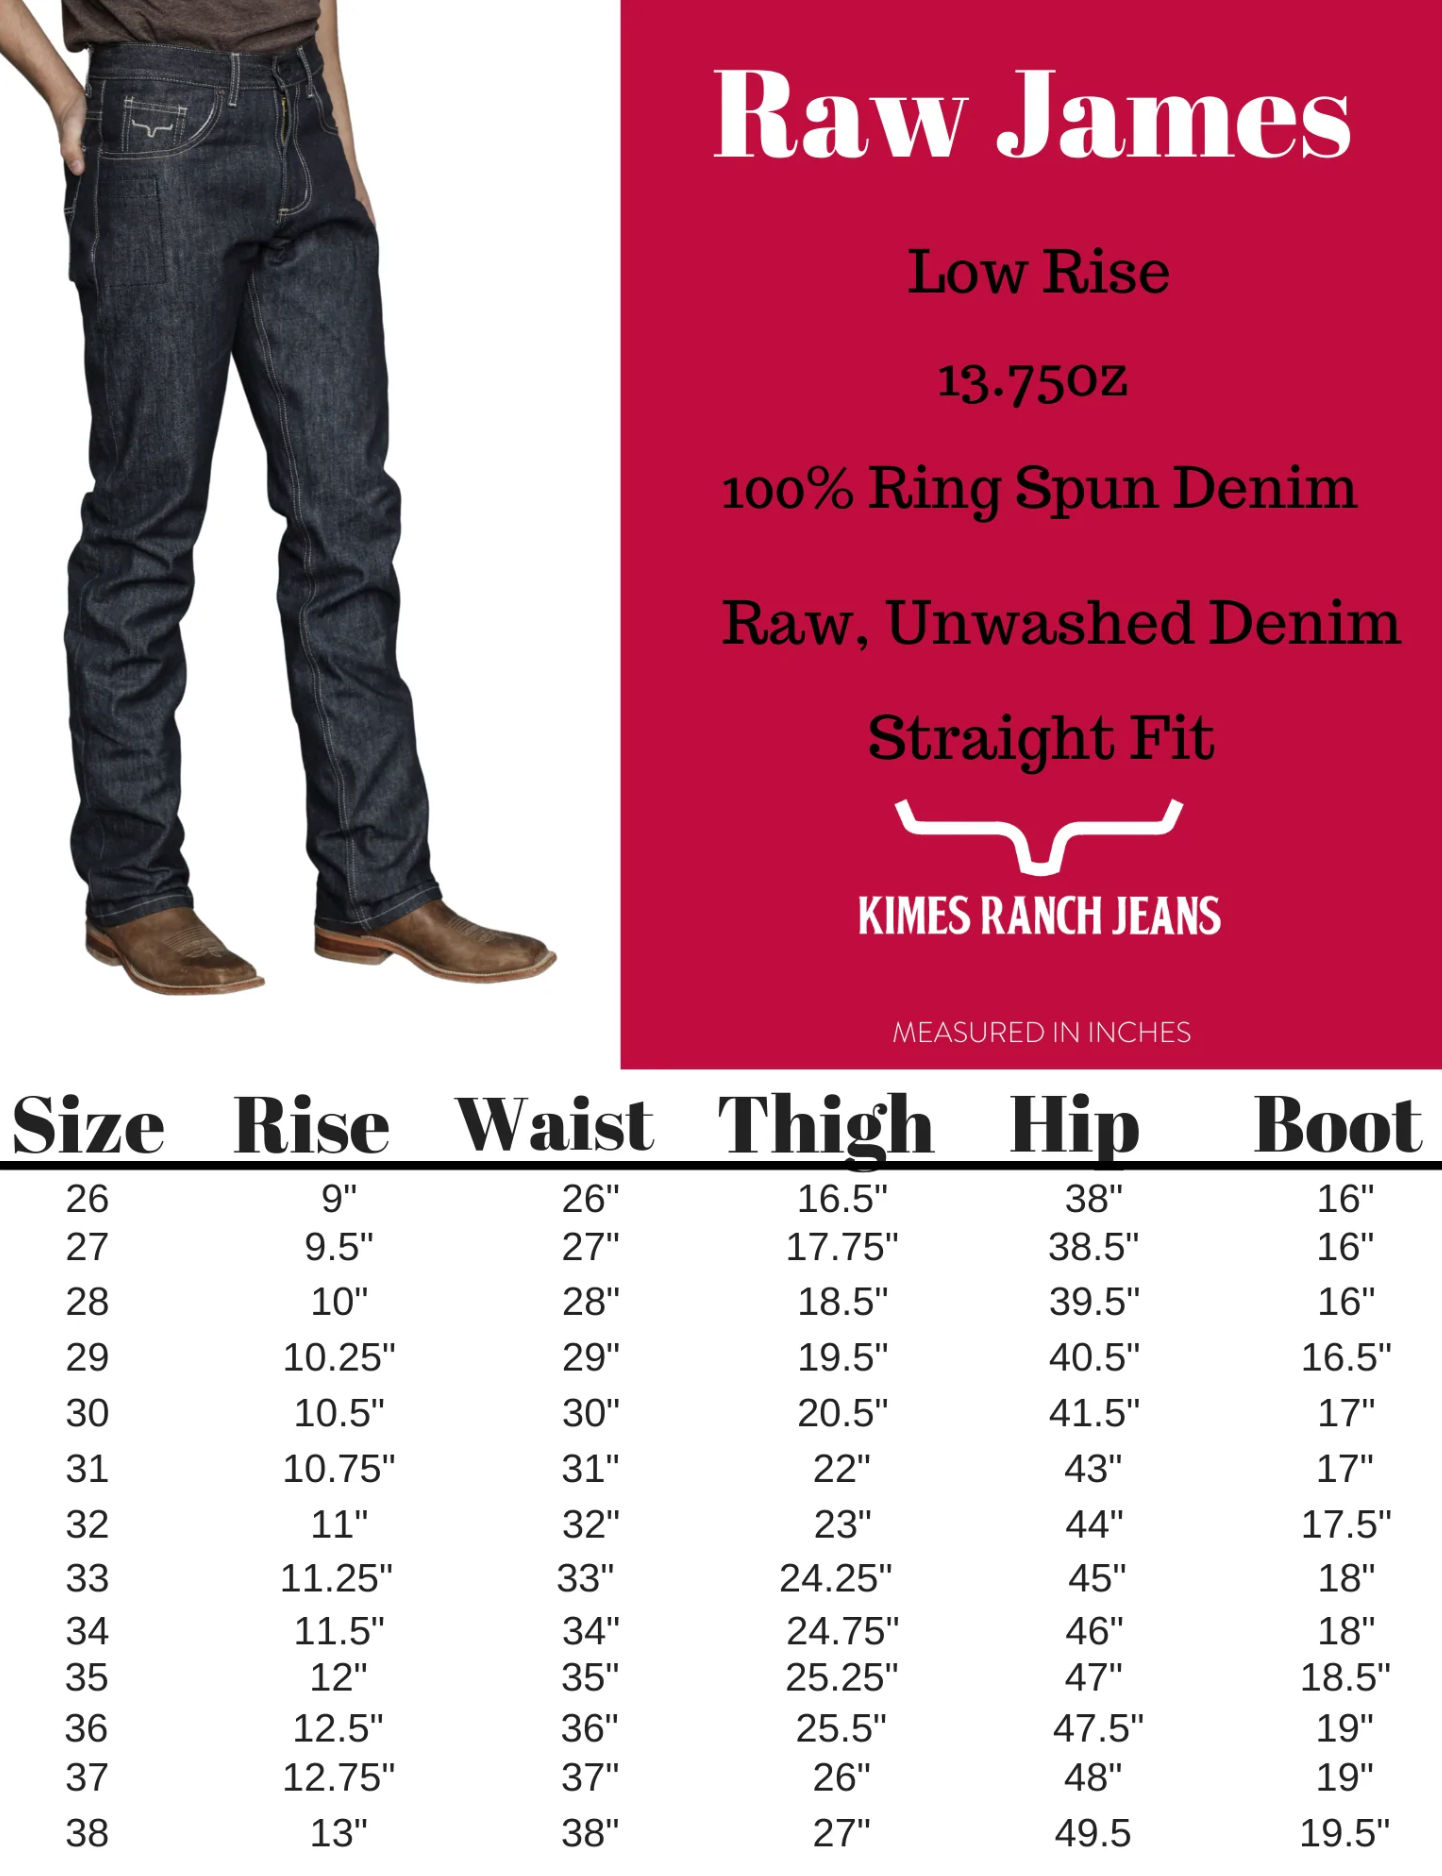 Kimes Ranch Raw James Size Guide | Dixie's